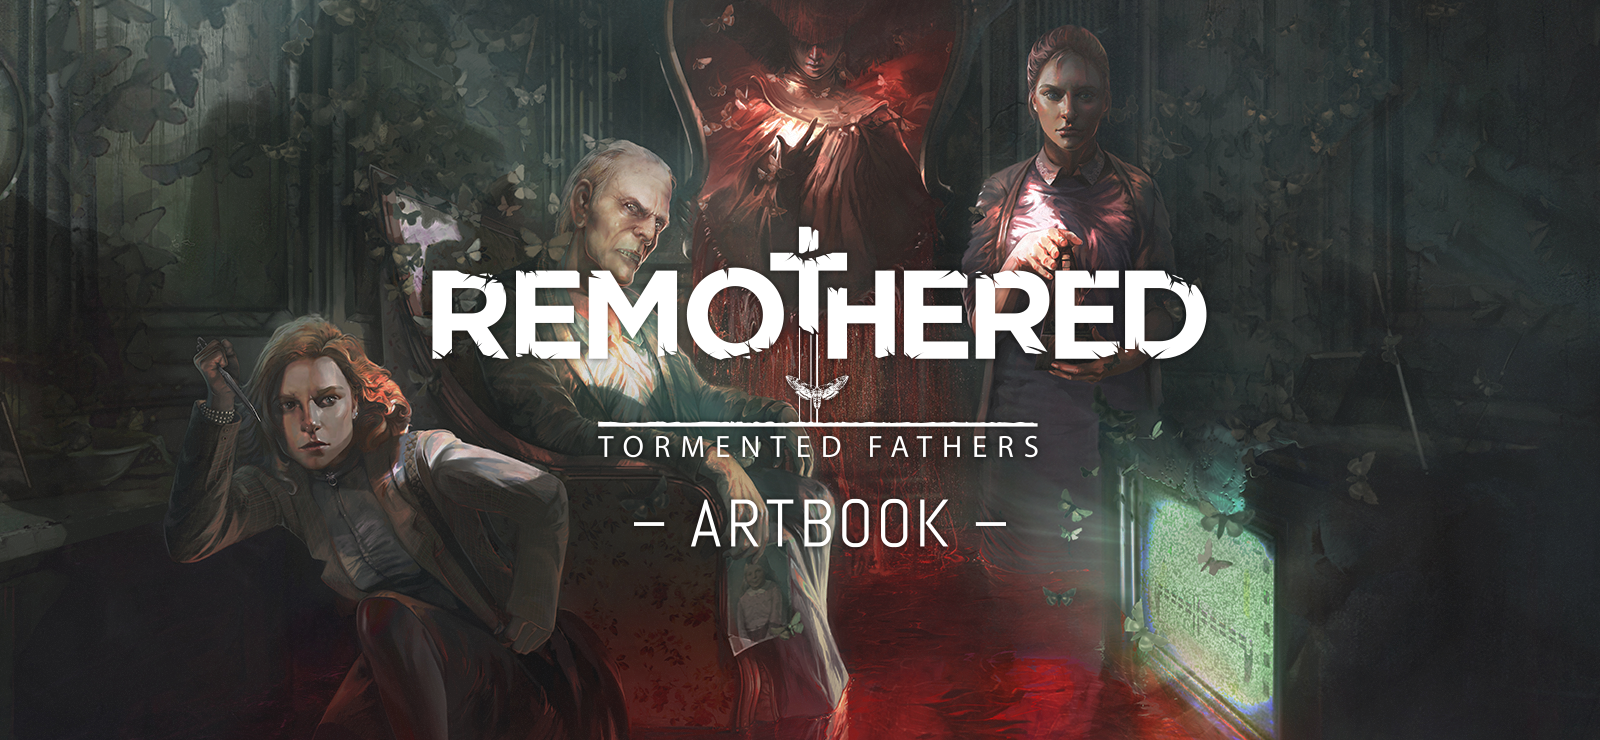 Remothered: Tormented Fathers - Artbook